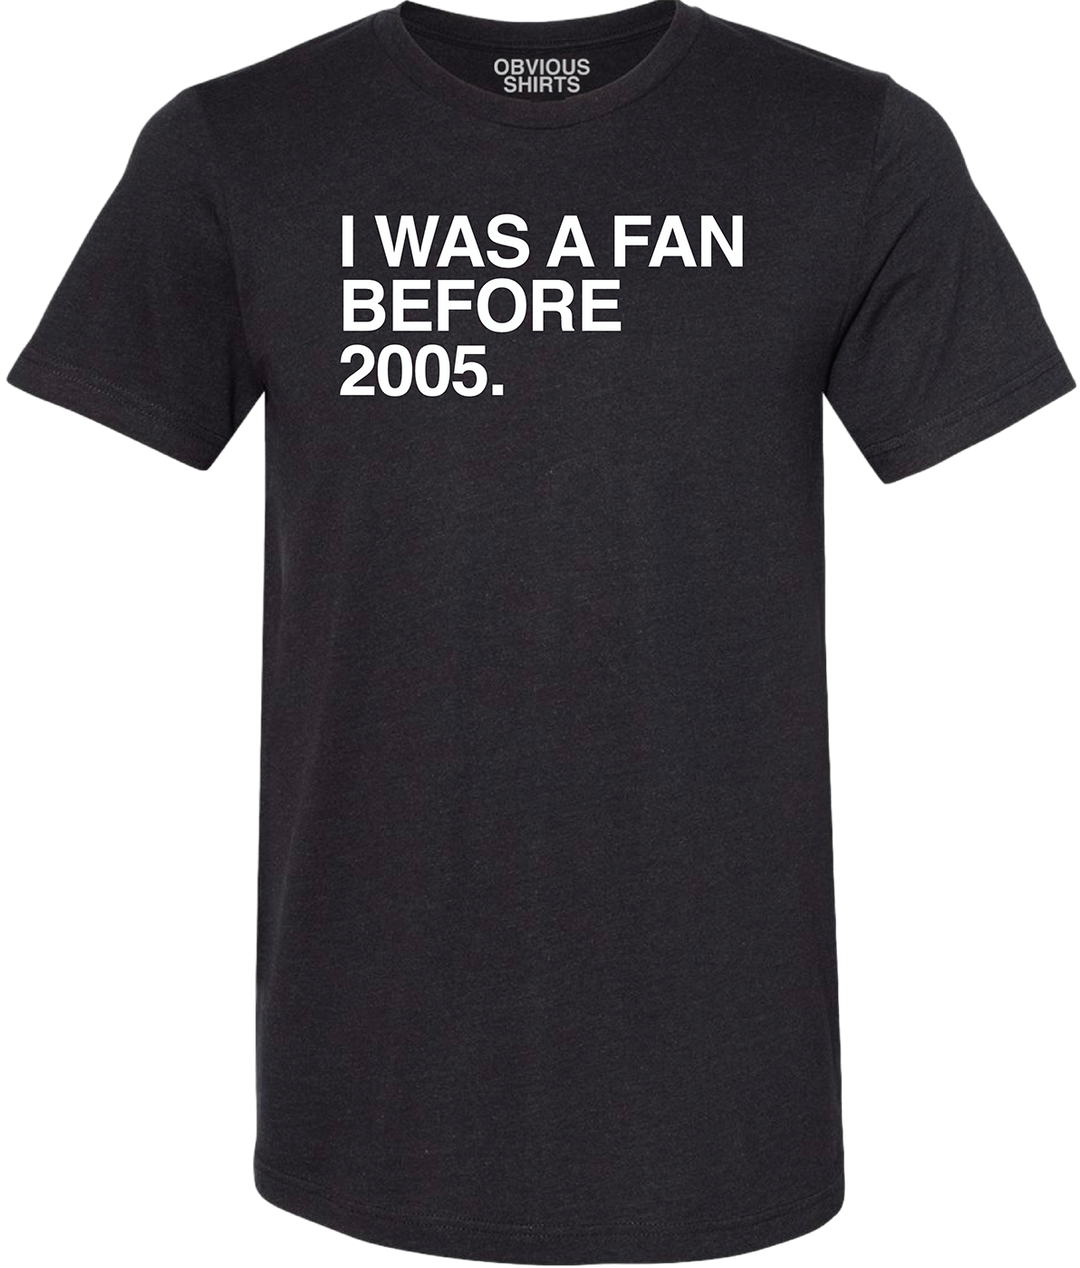 I WAS A FAN BEFORE 2005. - OBVIOUS SHIRTS.